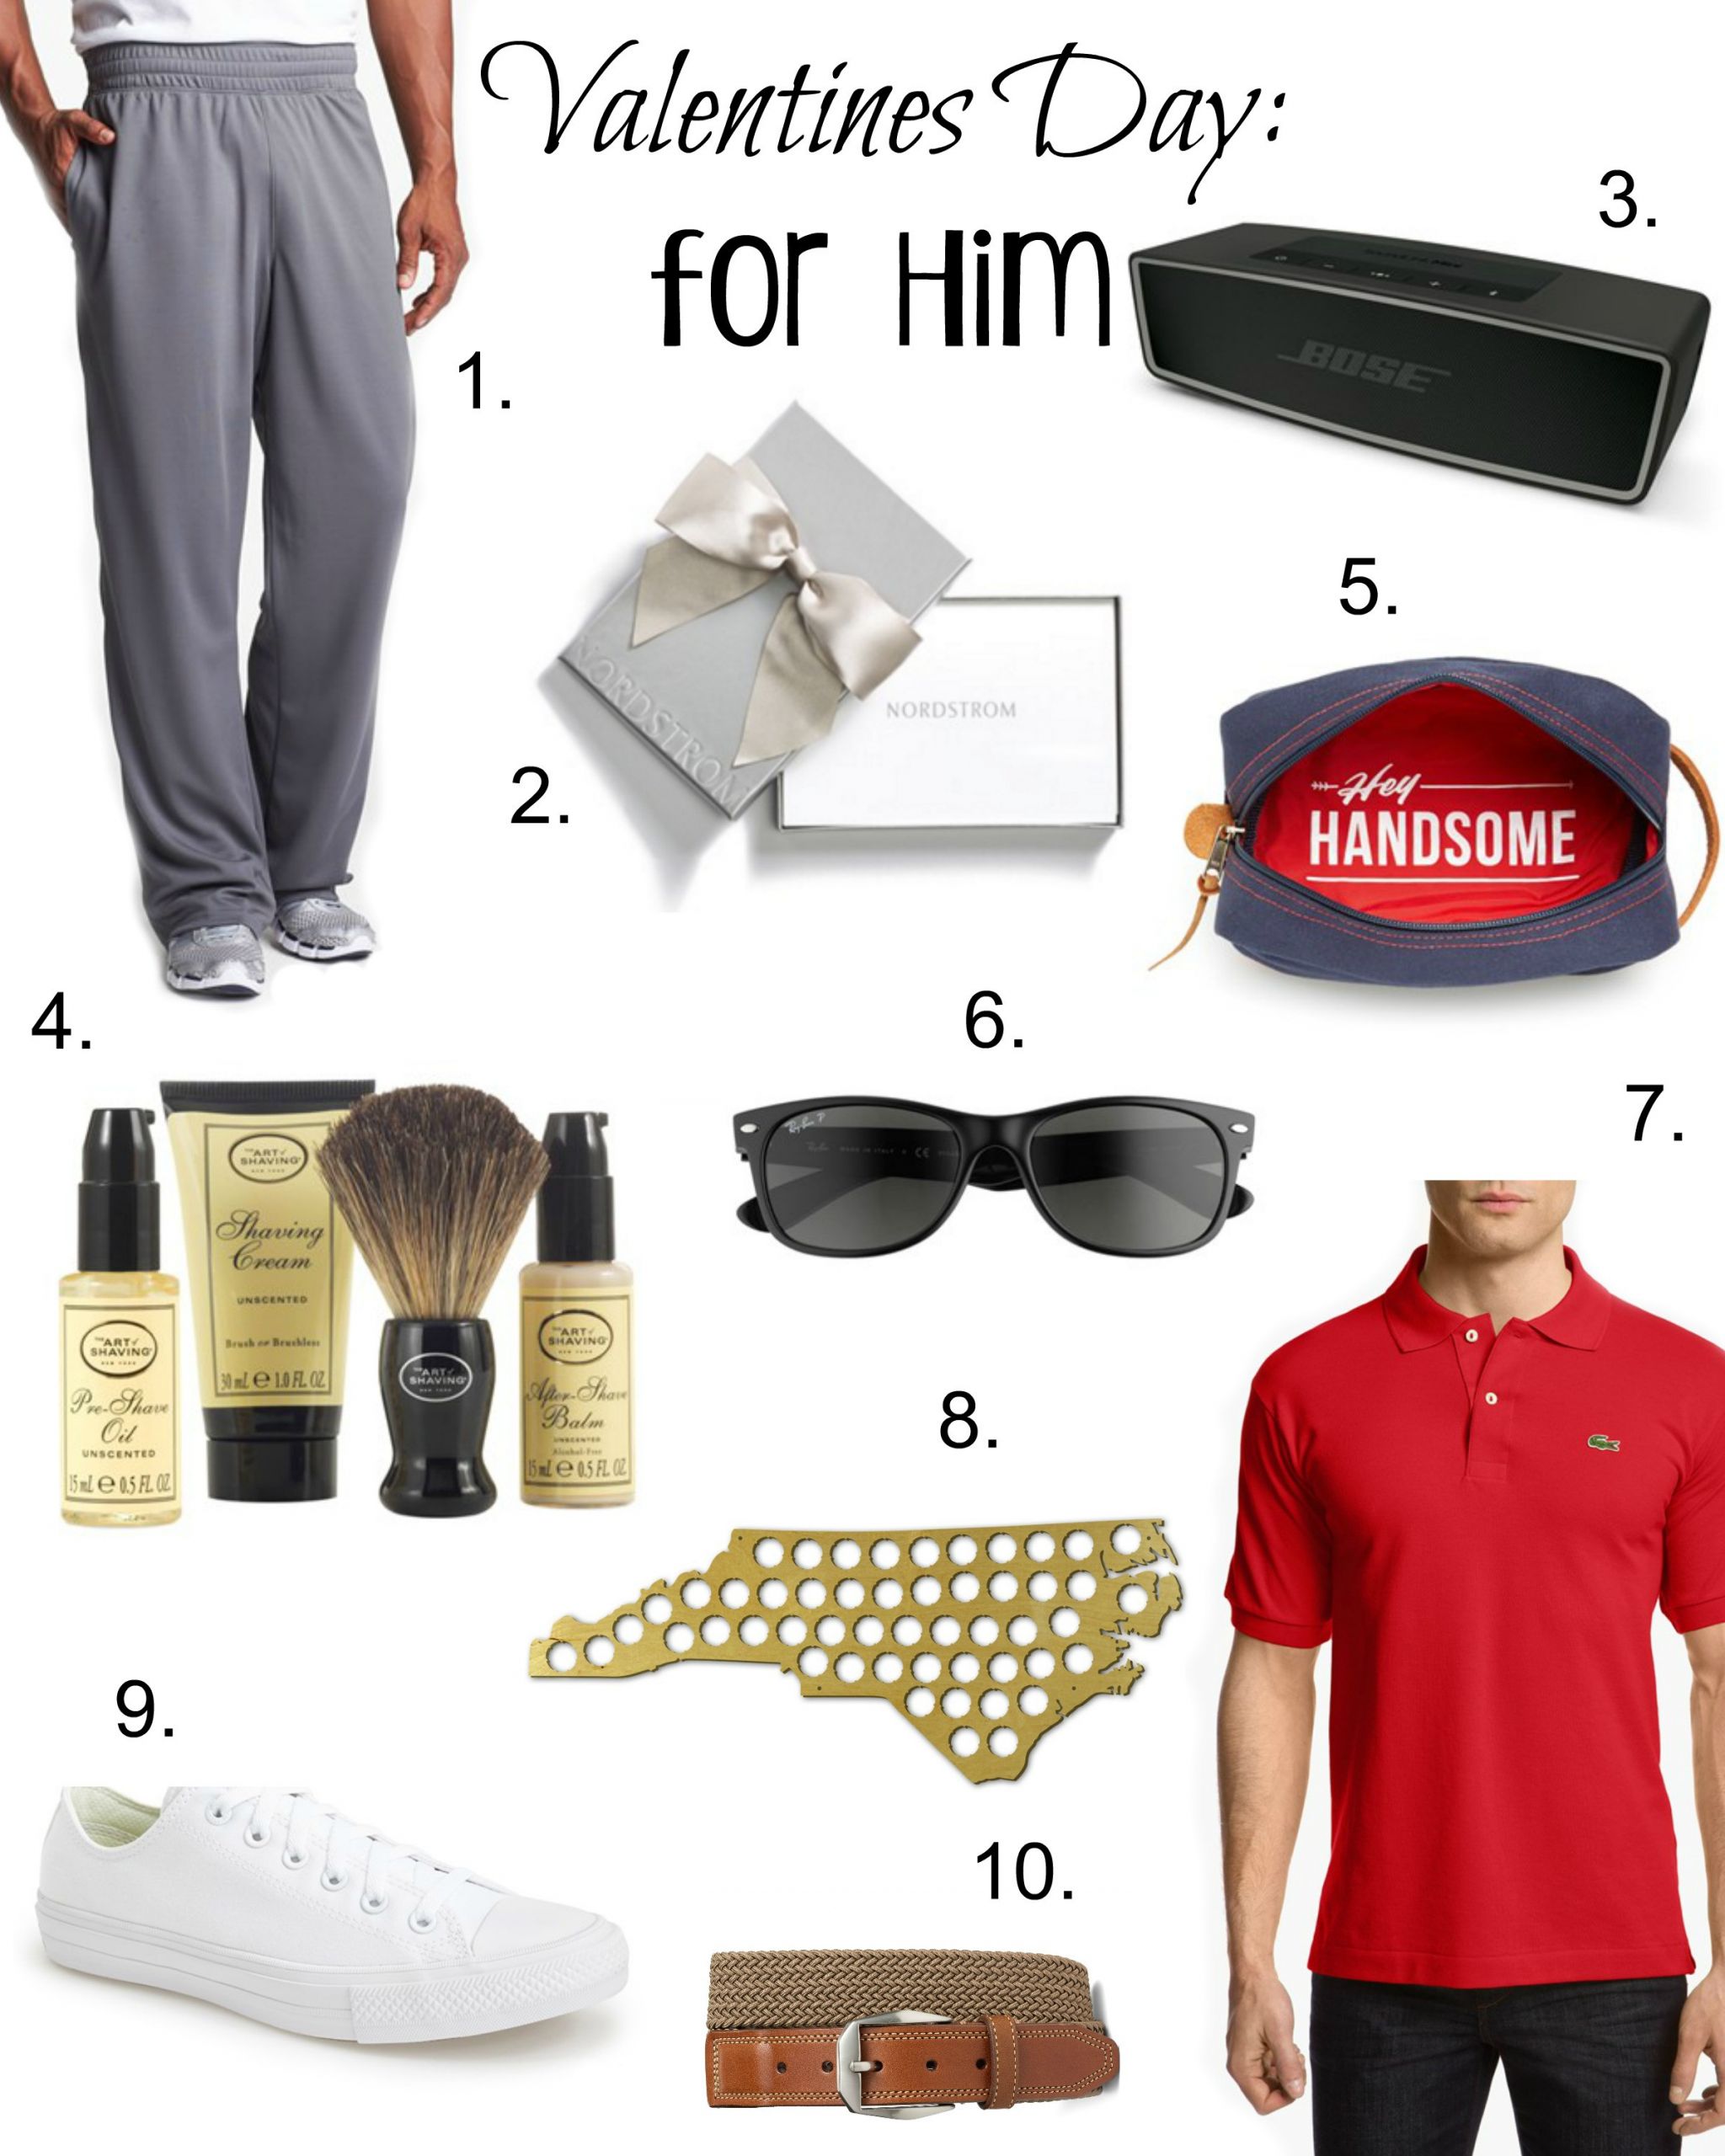 Funny Valentines Day Gifts For Him
 Top 10 Valentines Day Gifts For Him